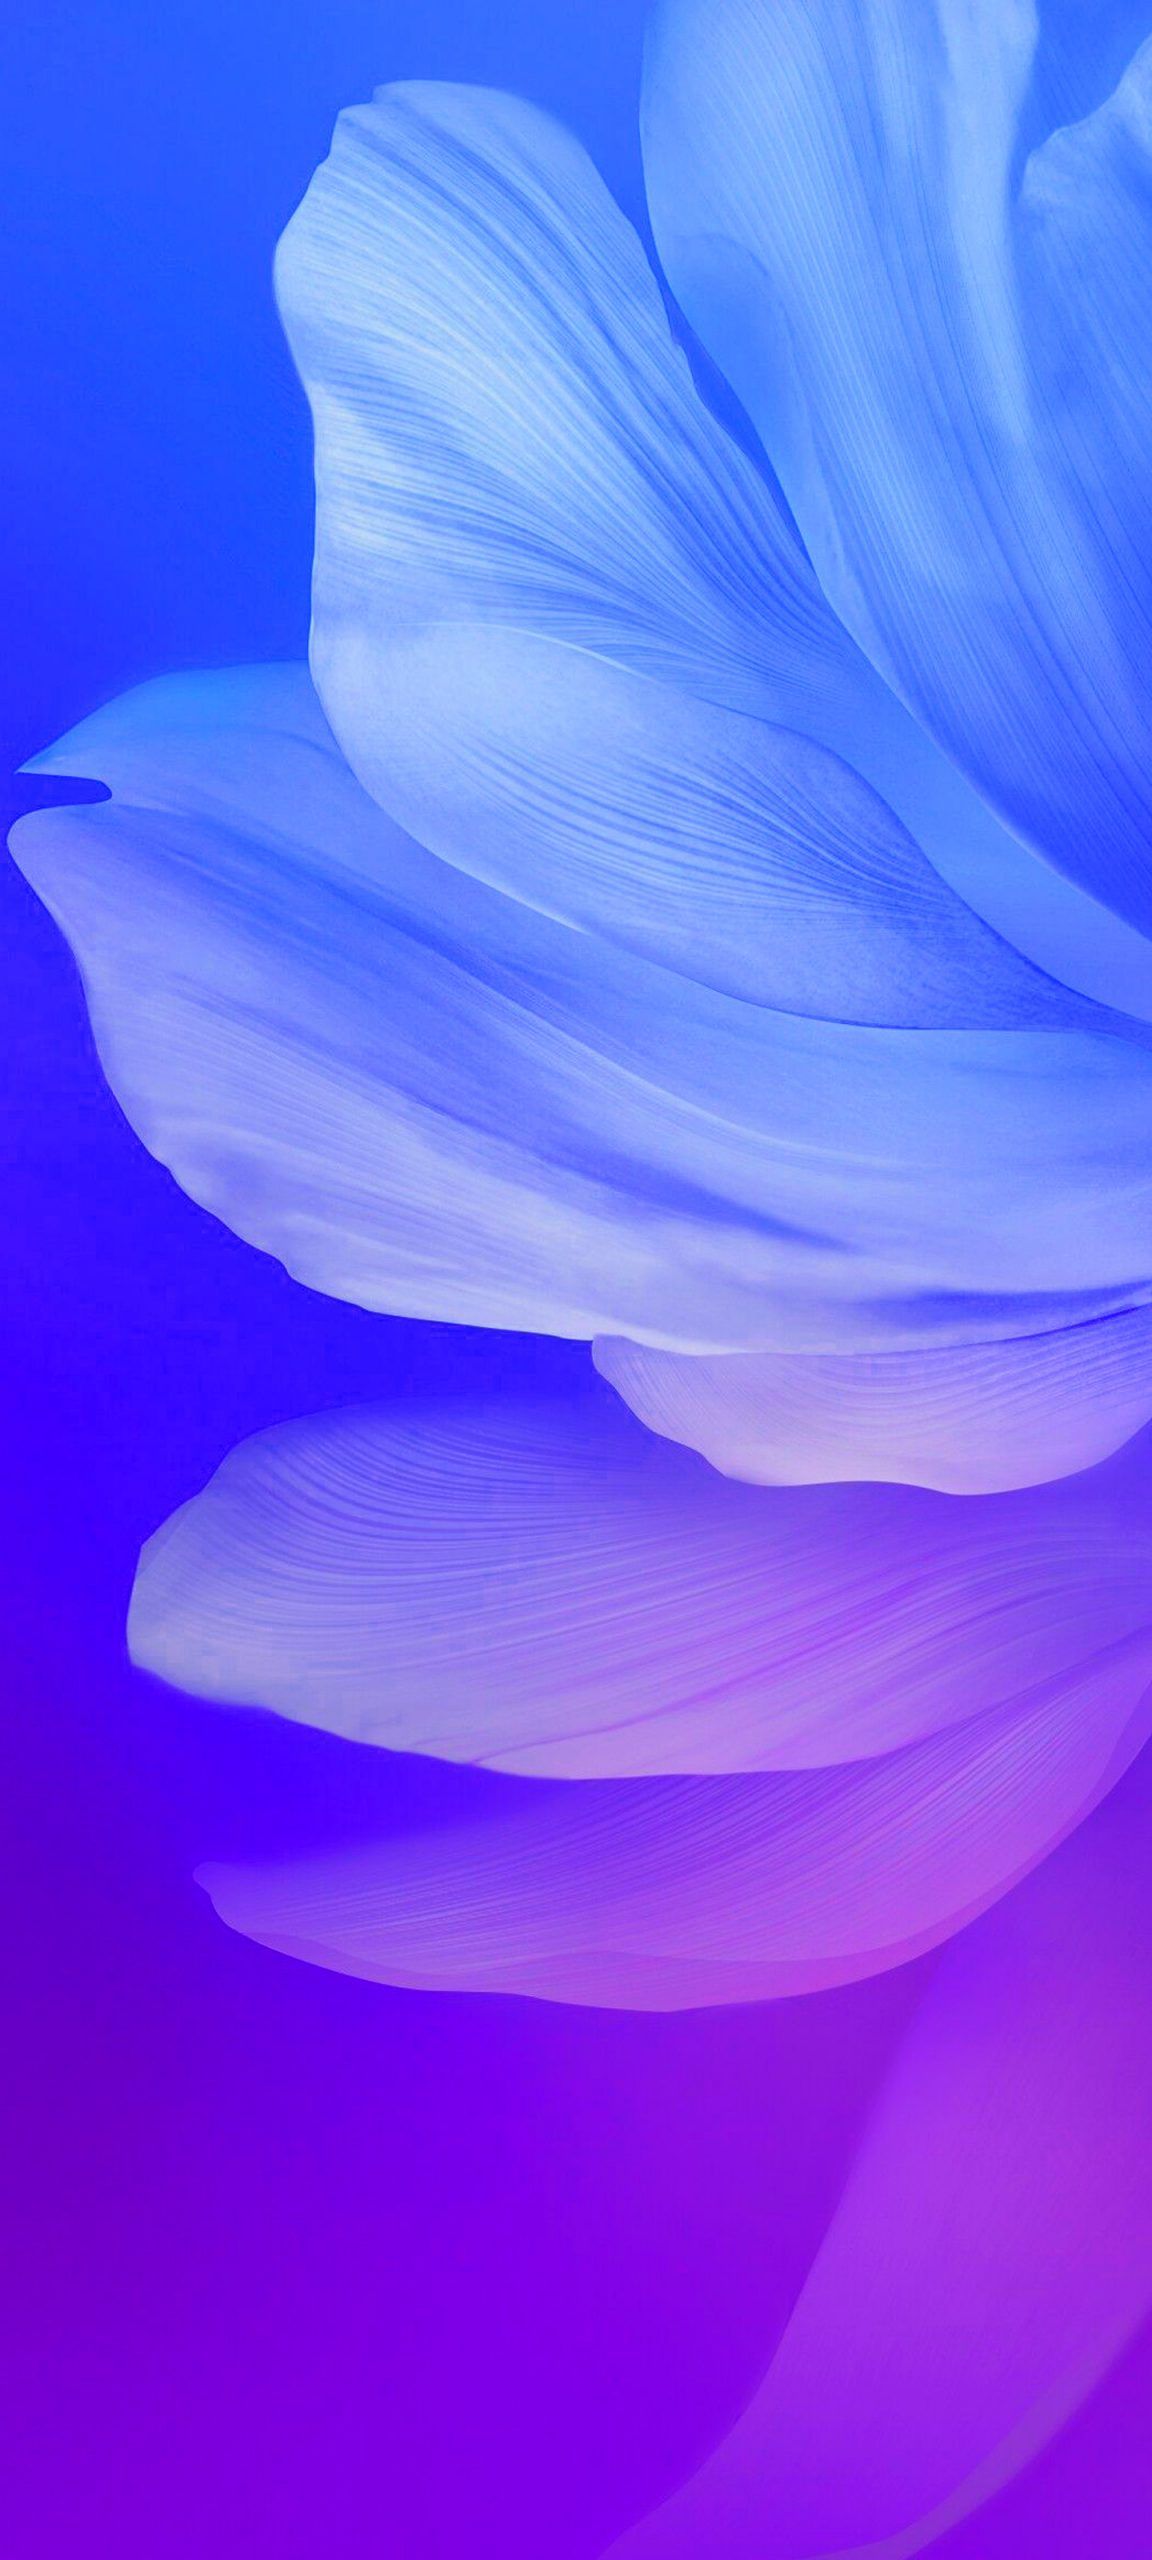 Cool Alternative Wallpaper for Samsung Galaxy S21 Ultra 5G with Flower Petals HD Wallpaper for Laptops and Smartphones